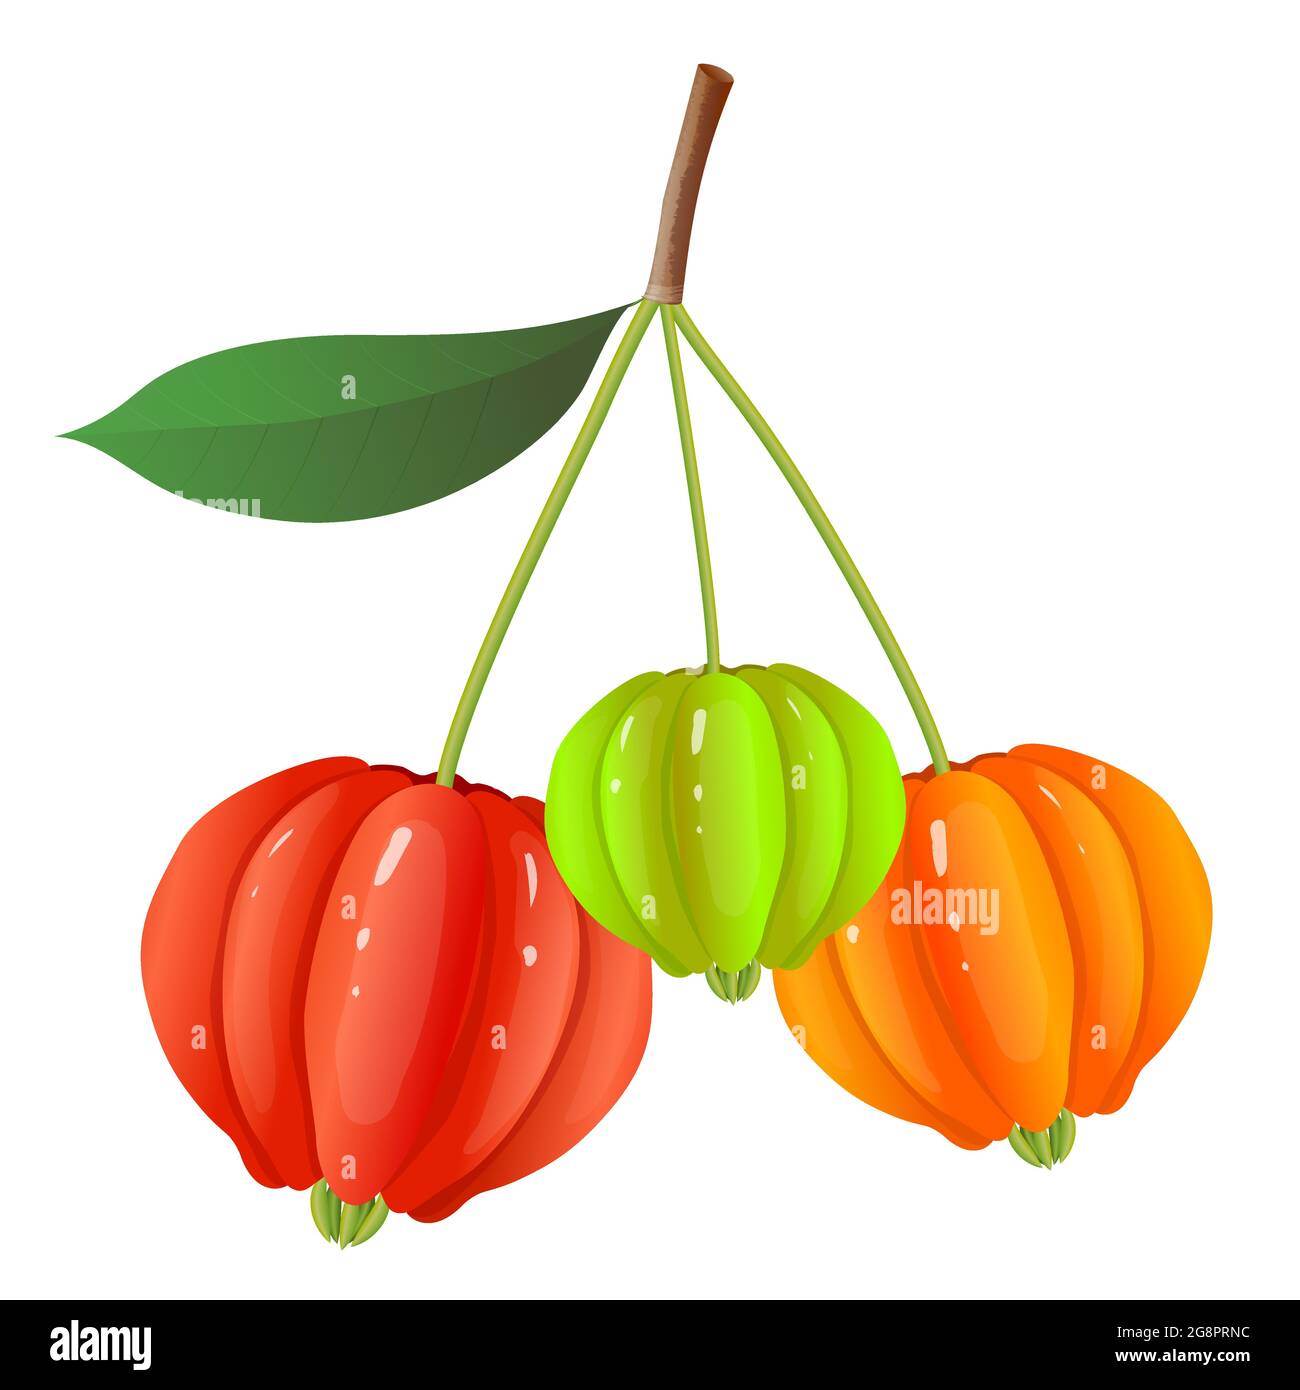 Berry Fruits, vector realistic Illustration of colorful Pitanga, Suriname Cherry, Brazilian Cherry or Eugenia Uniflora Fruits on a branch, Isolated Stock Vector